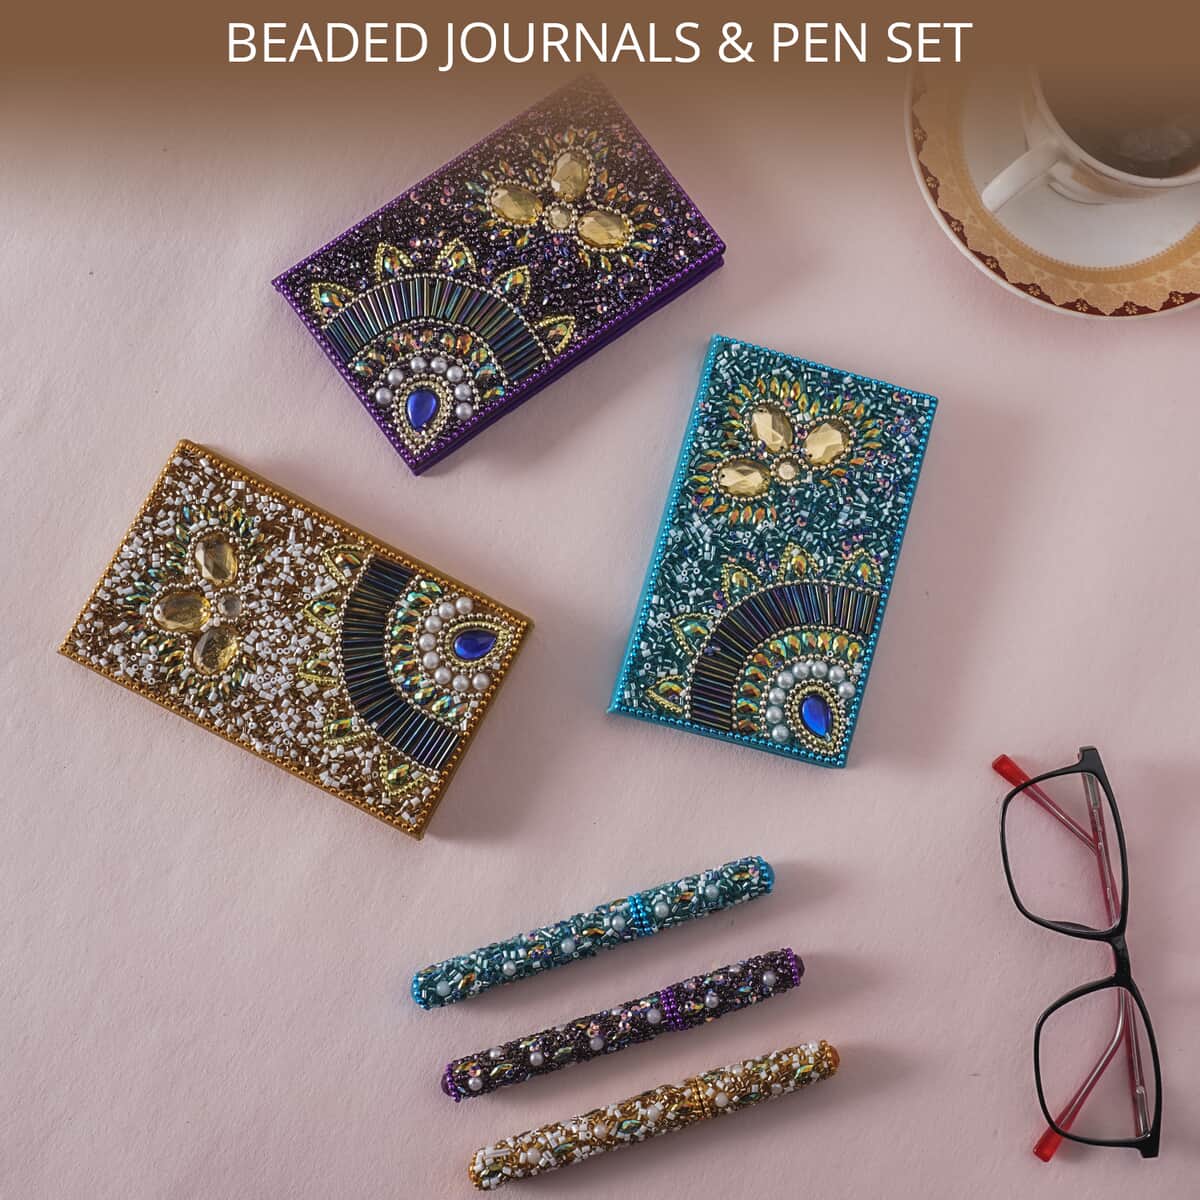 Set of 3 Multi Color Simulated Pearls and Beaded Journals (5"x3") and Matching Pen (5.5") image number 1